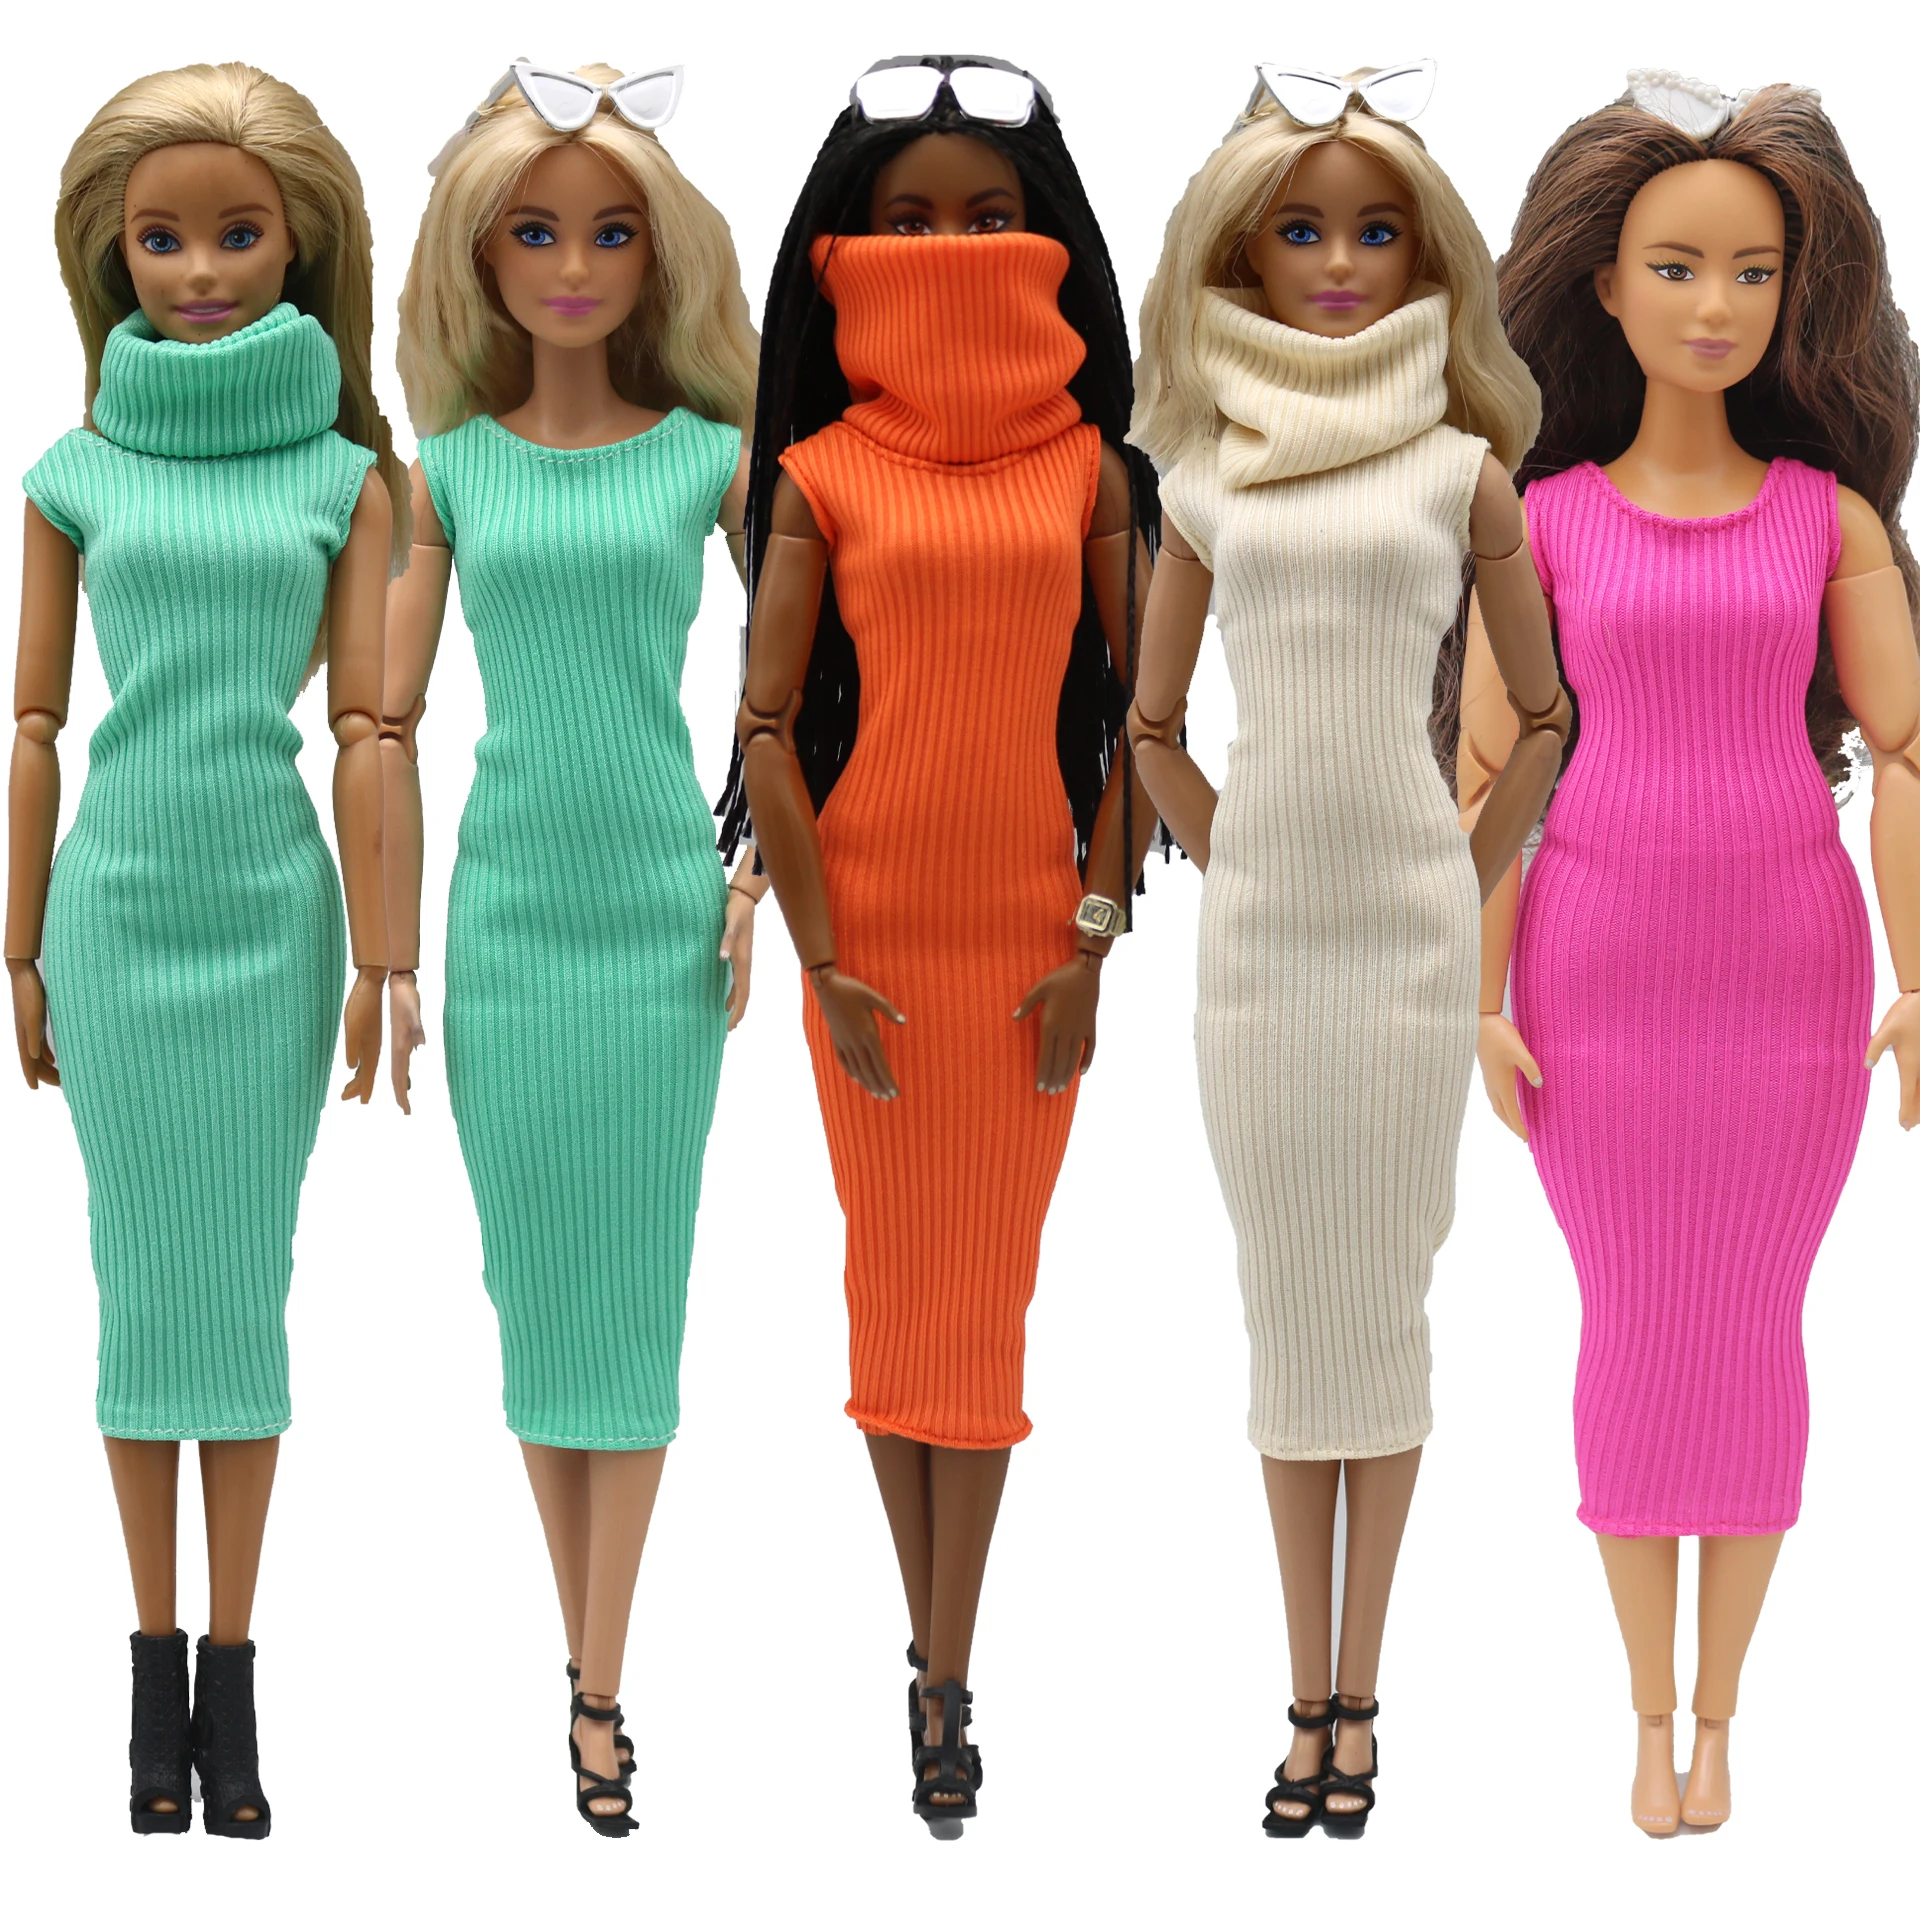 New 30cm 1/6 scarf cover elasticity dress  set Daily Wear Accessories Clothes for Barbies doll